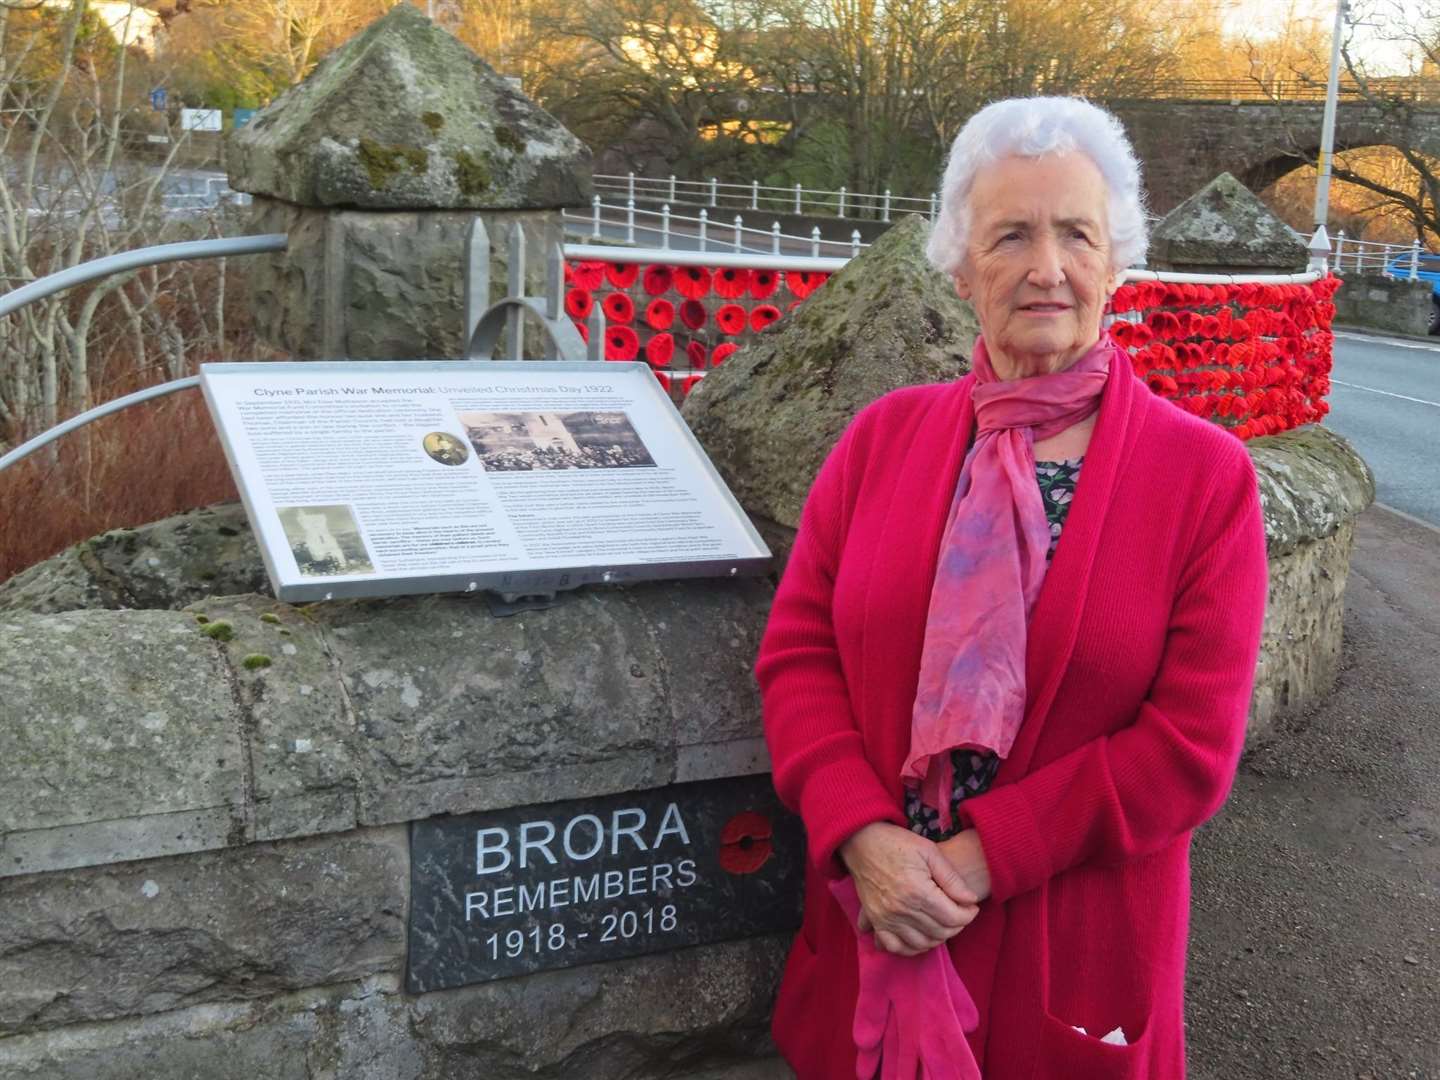 Former vice-chair of the Friends of Clyne War Memorial Association, Mrs Morag Sutherland.